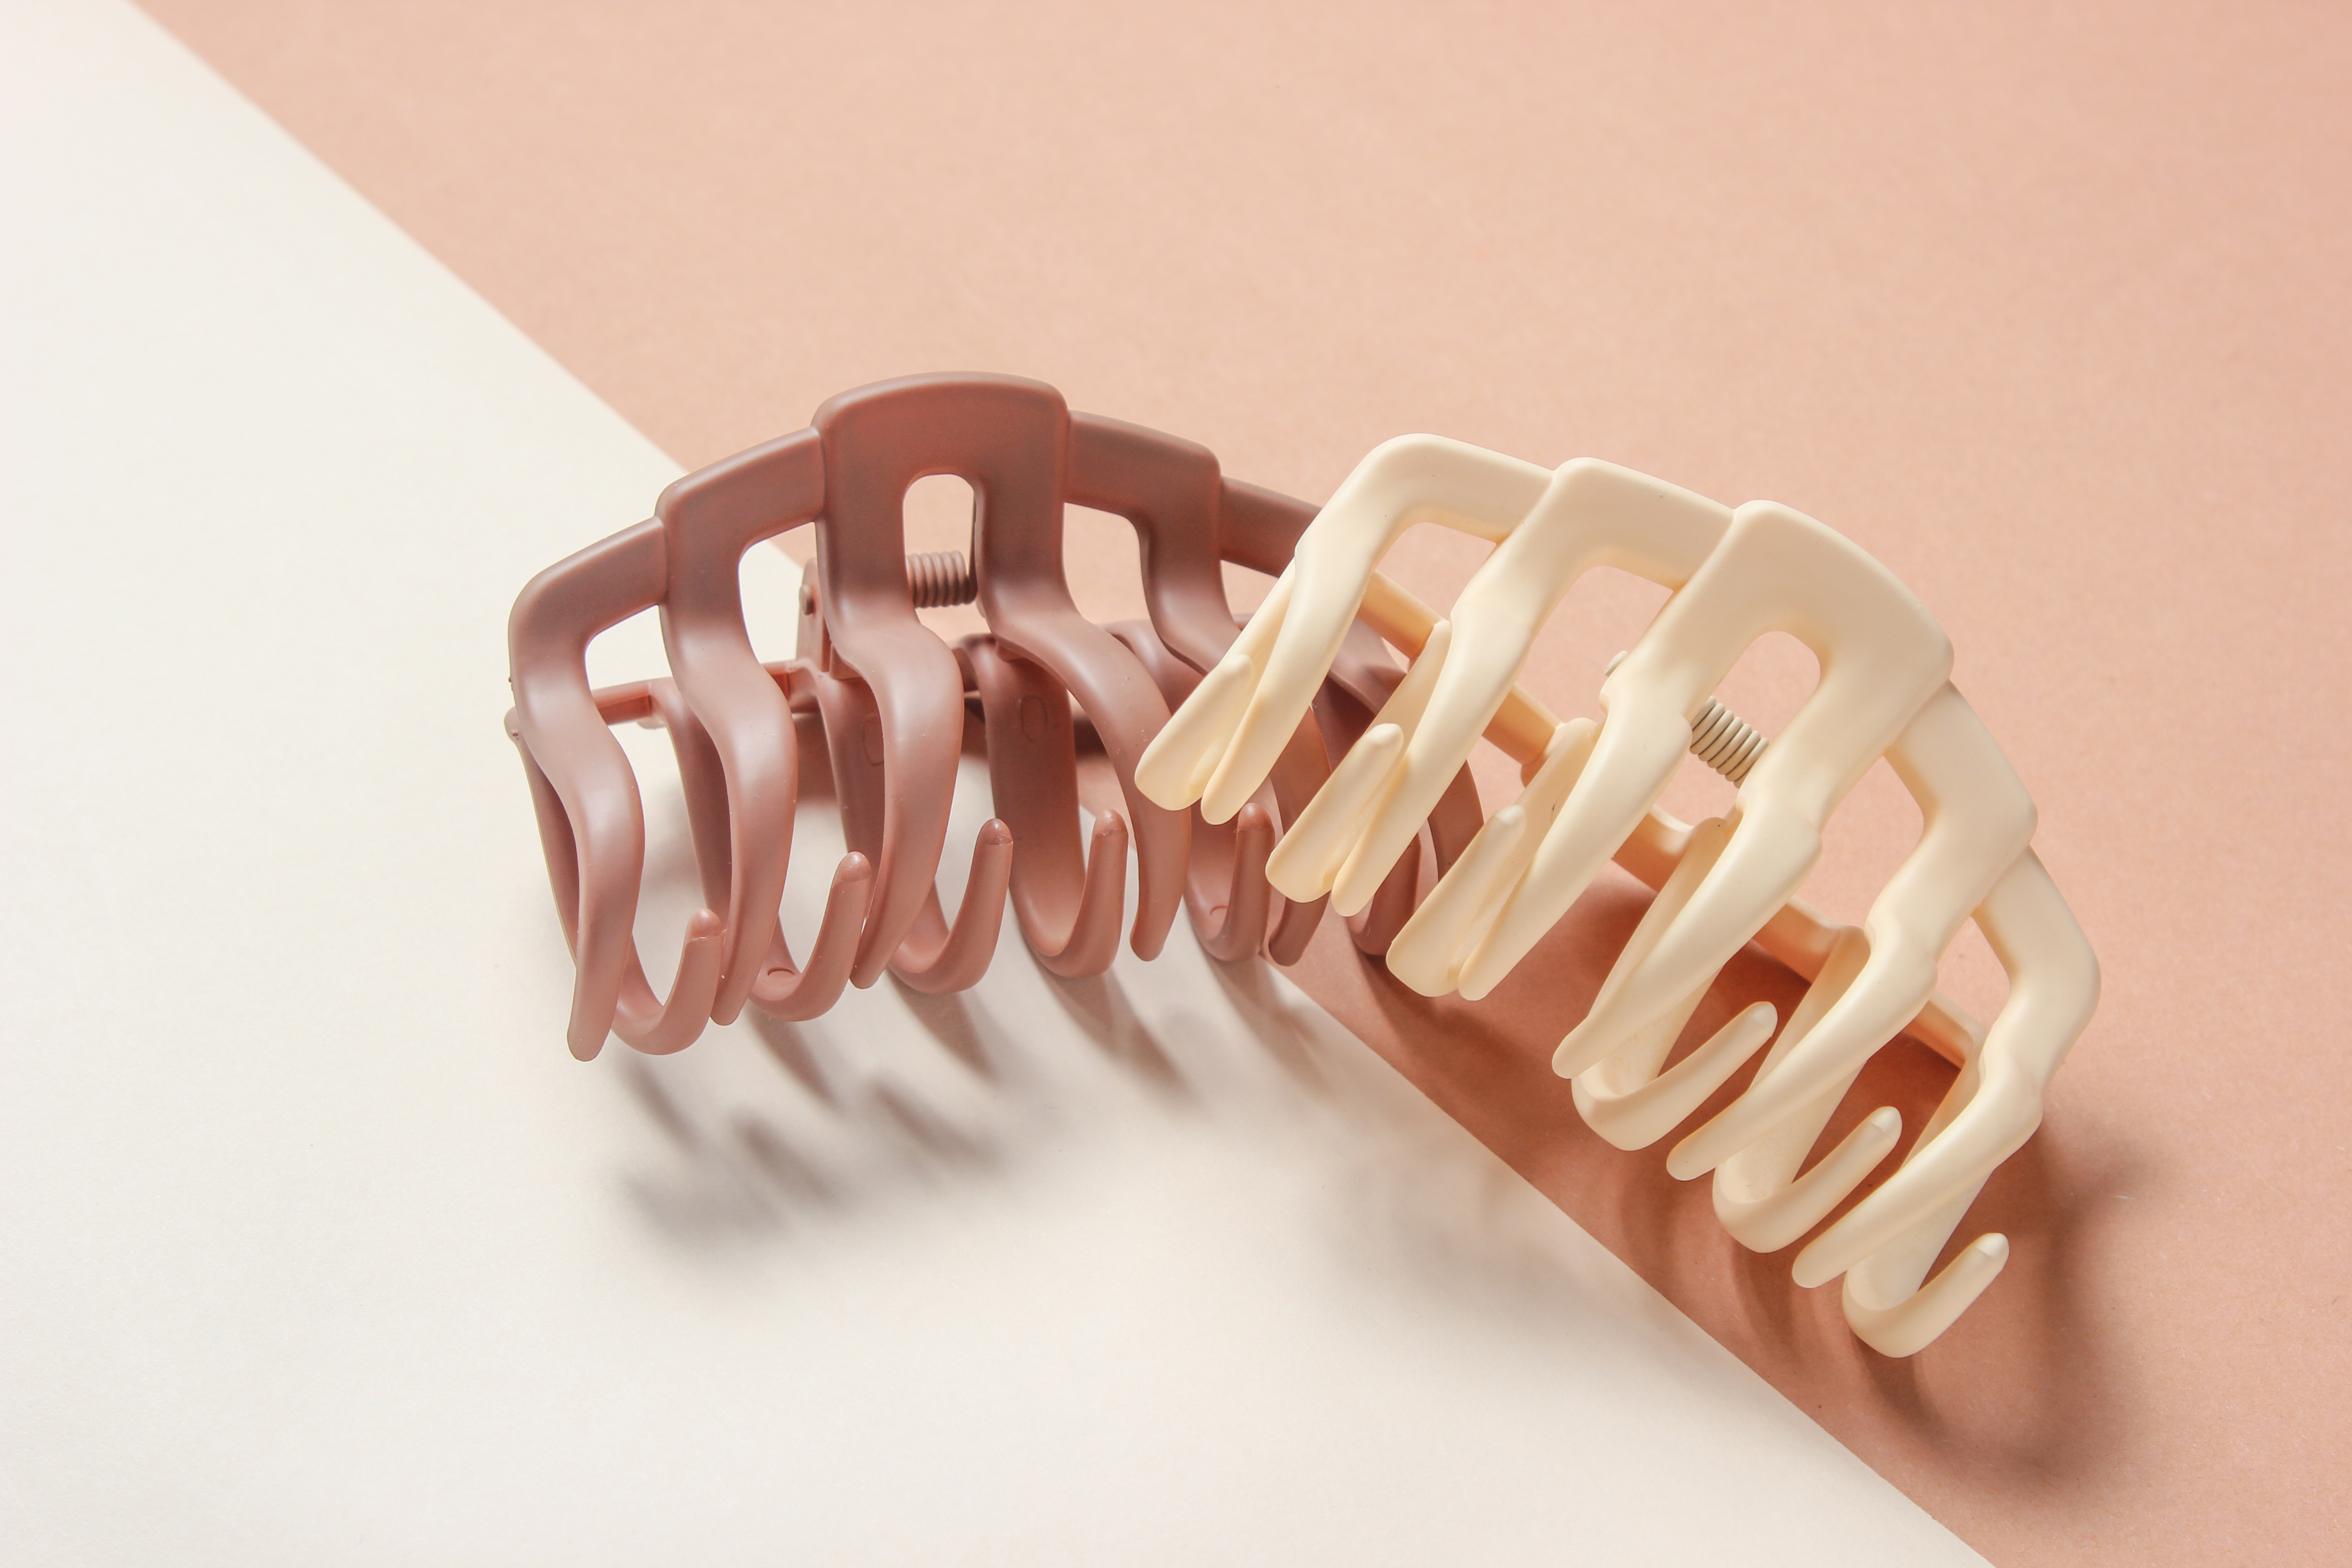 Two claw clips, one blush pink and one alabaster white, against a pink and white background.